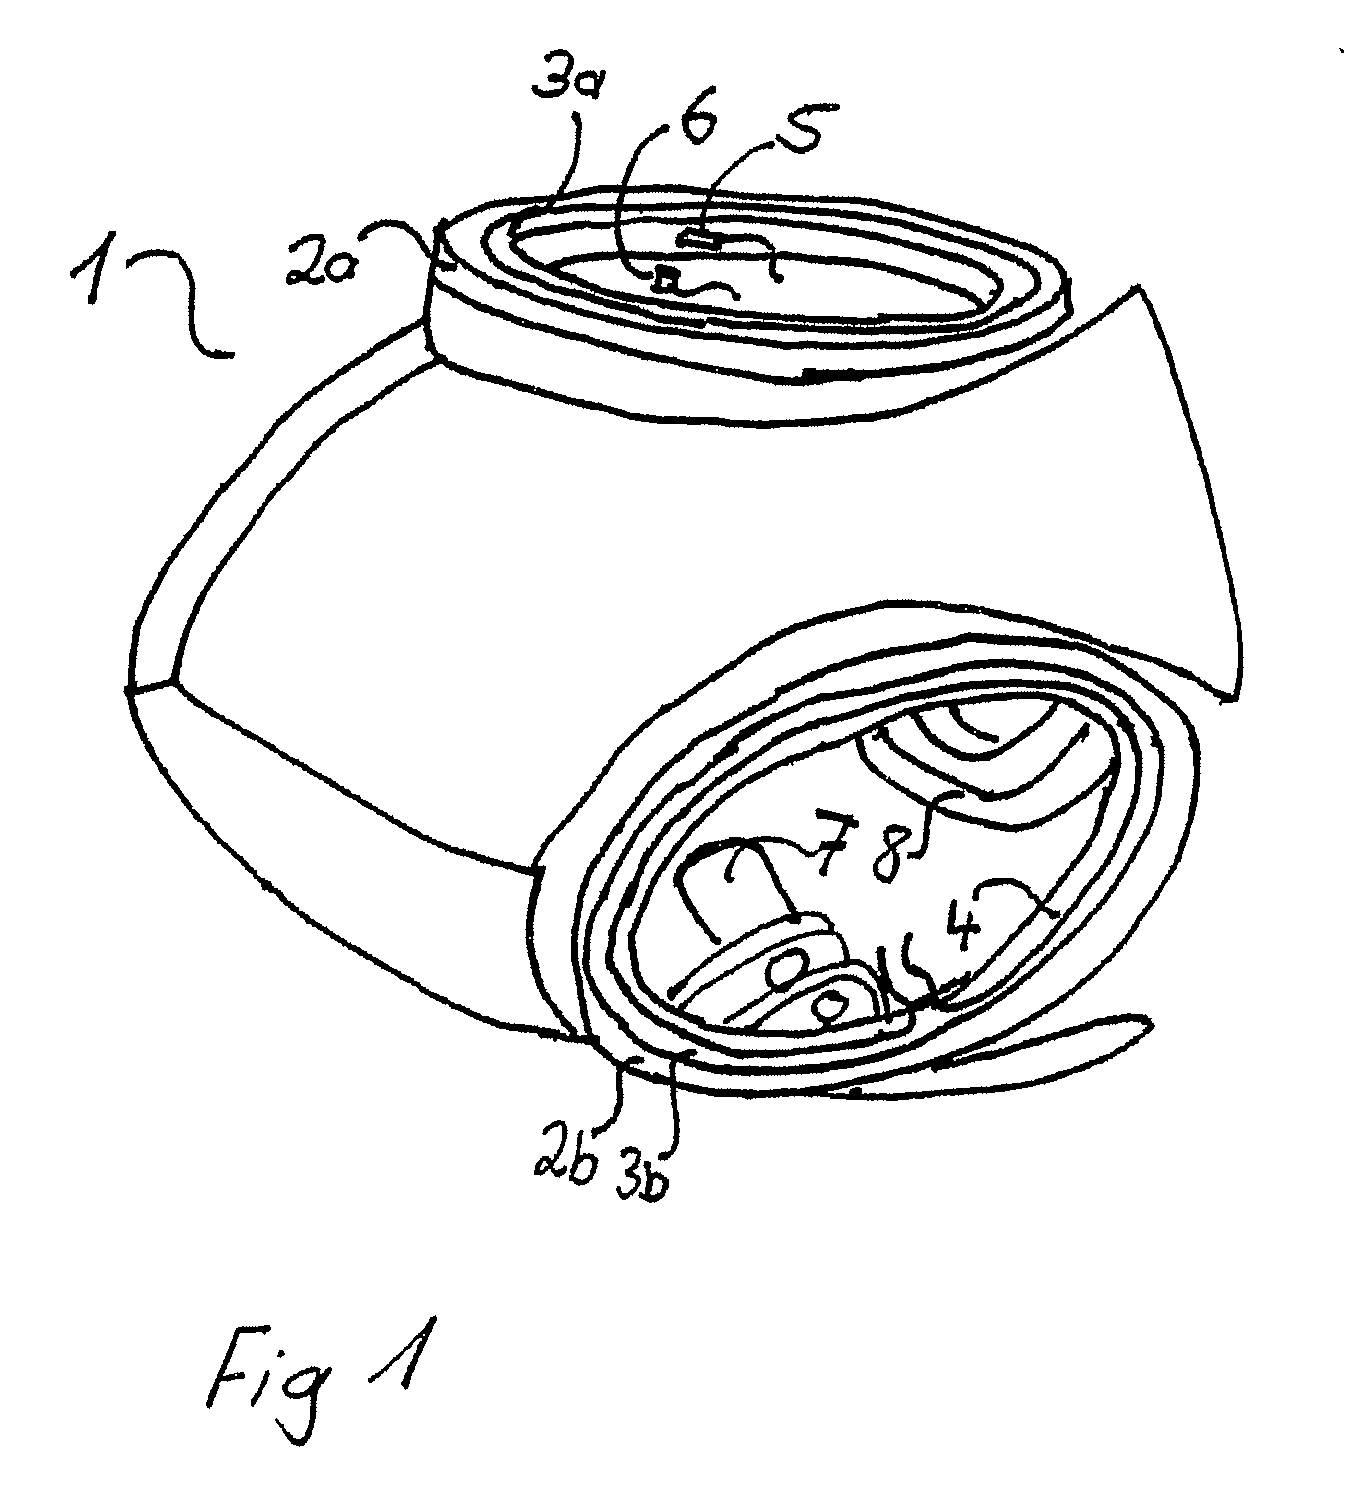 Device and method for detecting the loading of pivoted rotor blades